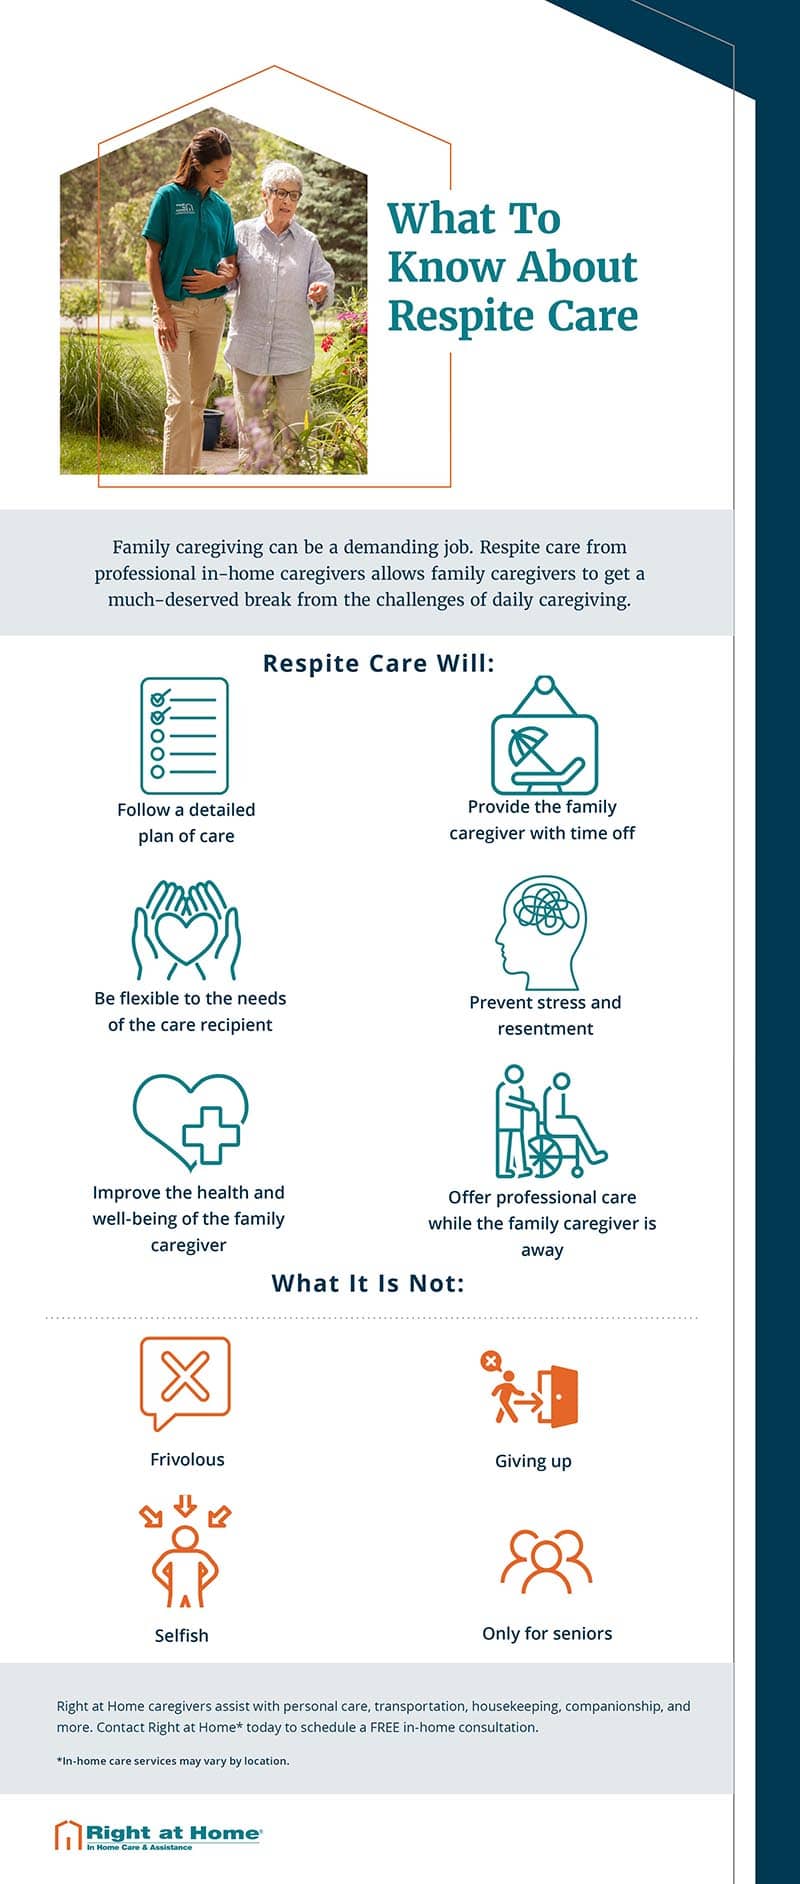 What to know about respite care - infographic image